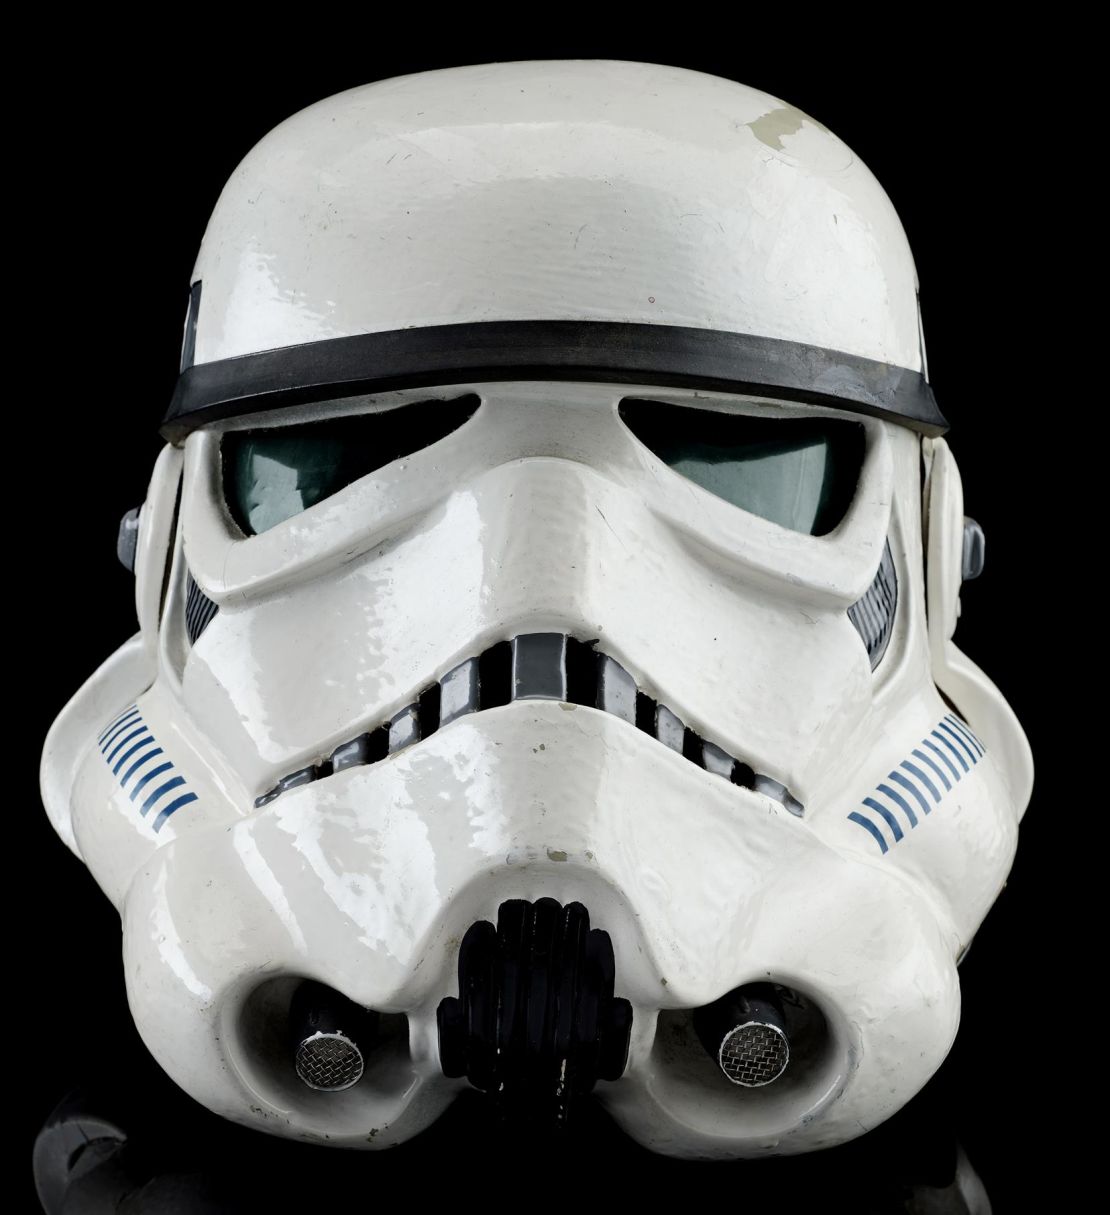 A storm trooper helmet is one of the priciest items.